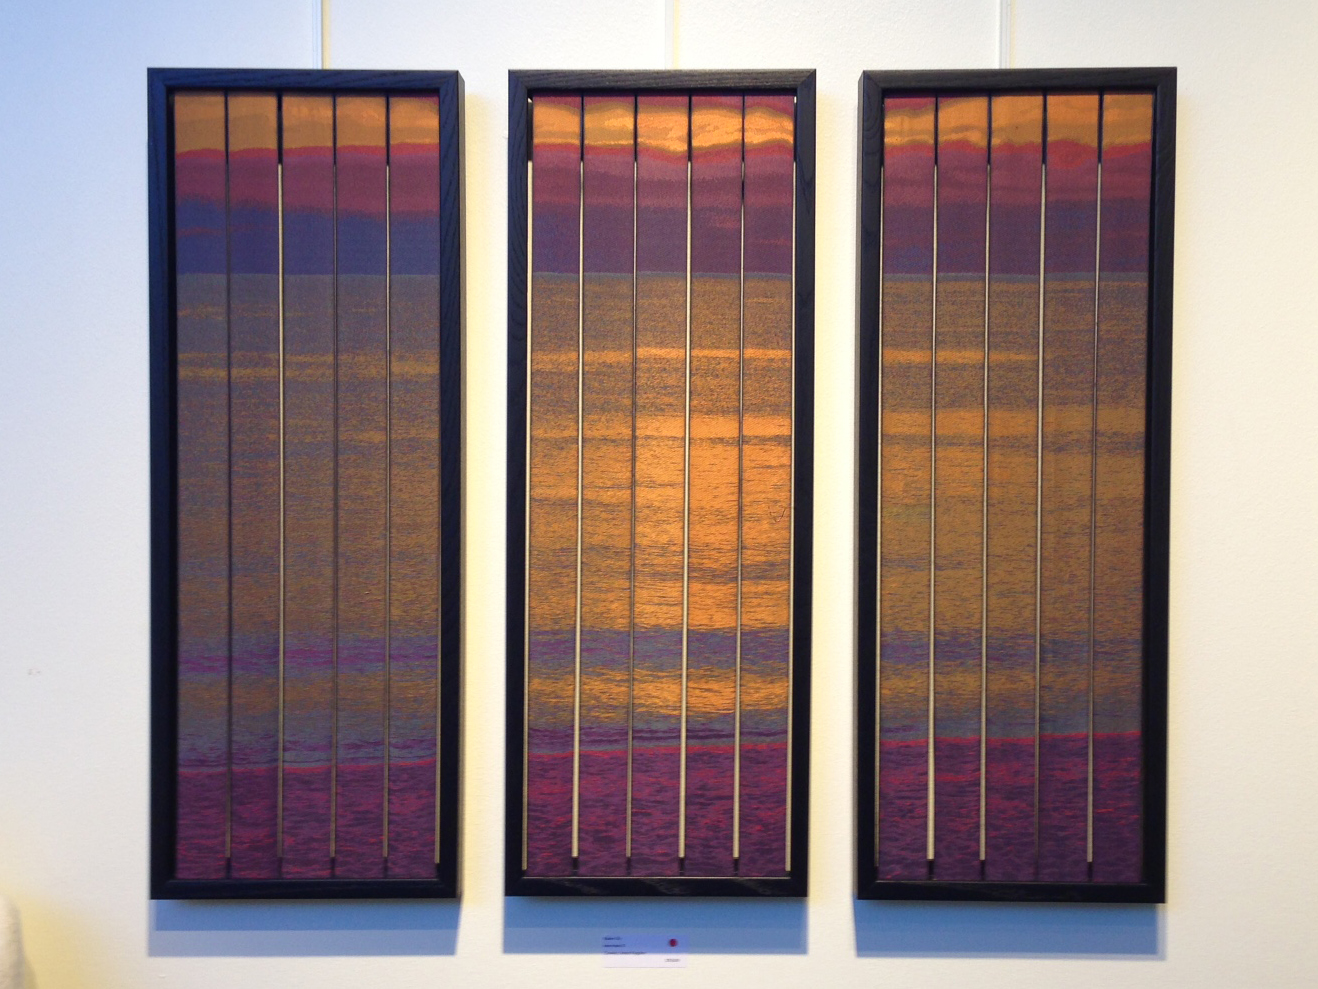 Interludes III jacquard woven silk triptych by Robert Ely on display at Complexity 2016